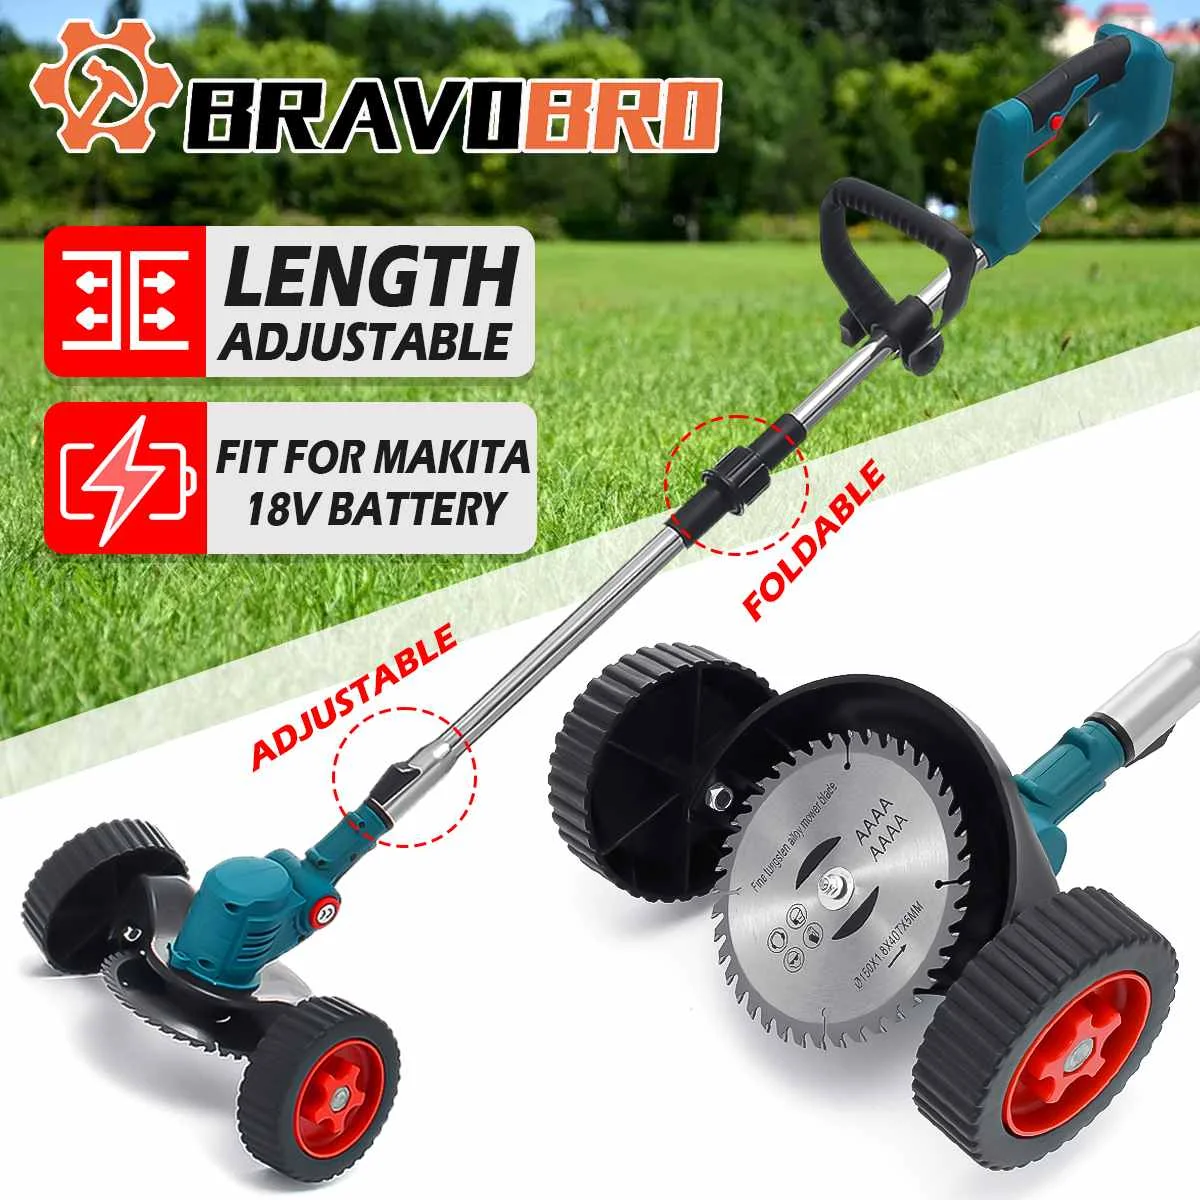 450W Electric Lawn Mower 12000RPM Cordless Grass Trimmer Length Adjustable Cutter Household Garden Tools For Makita 18V Battery